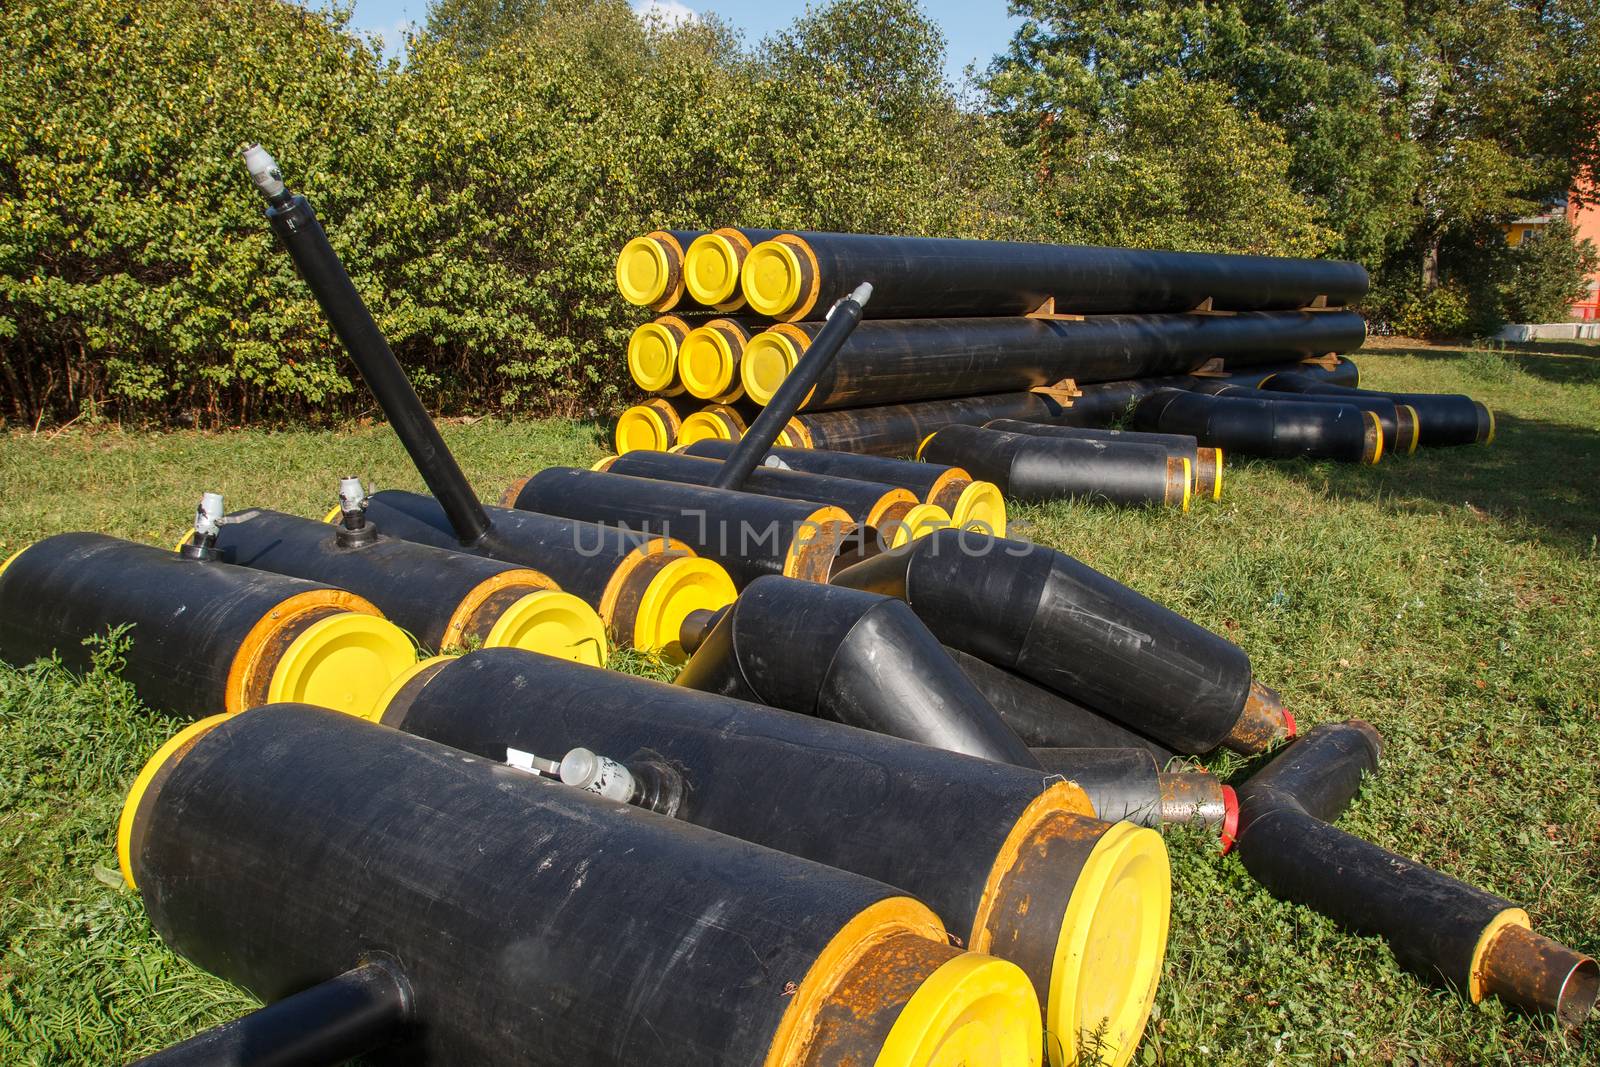 Some new yellow and black pipes that are going to be used for construction